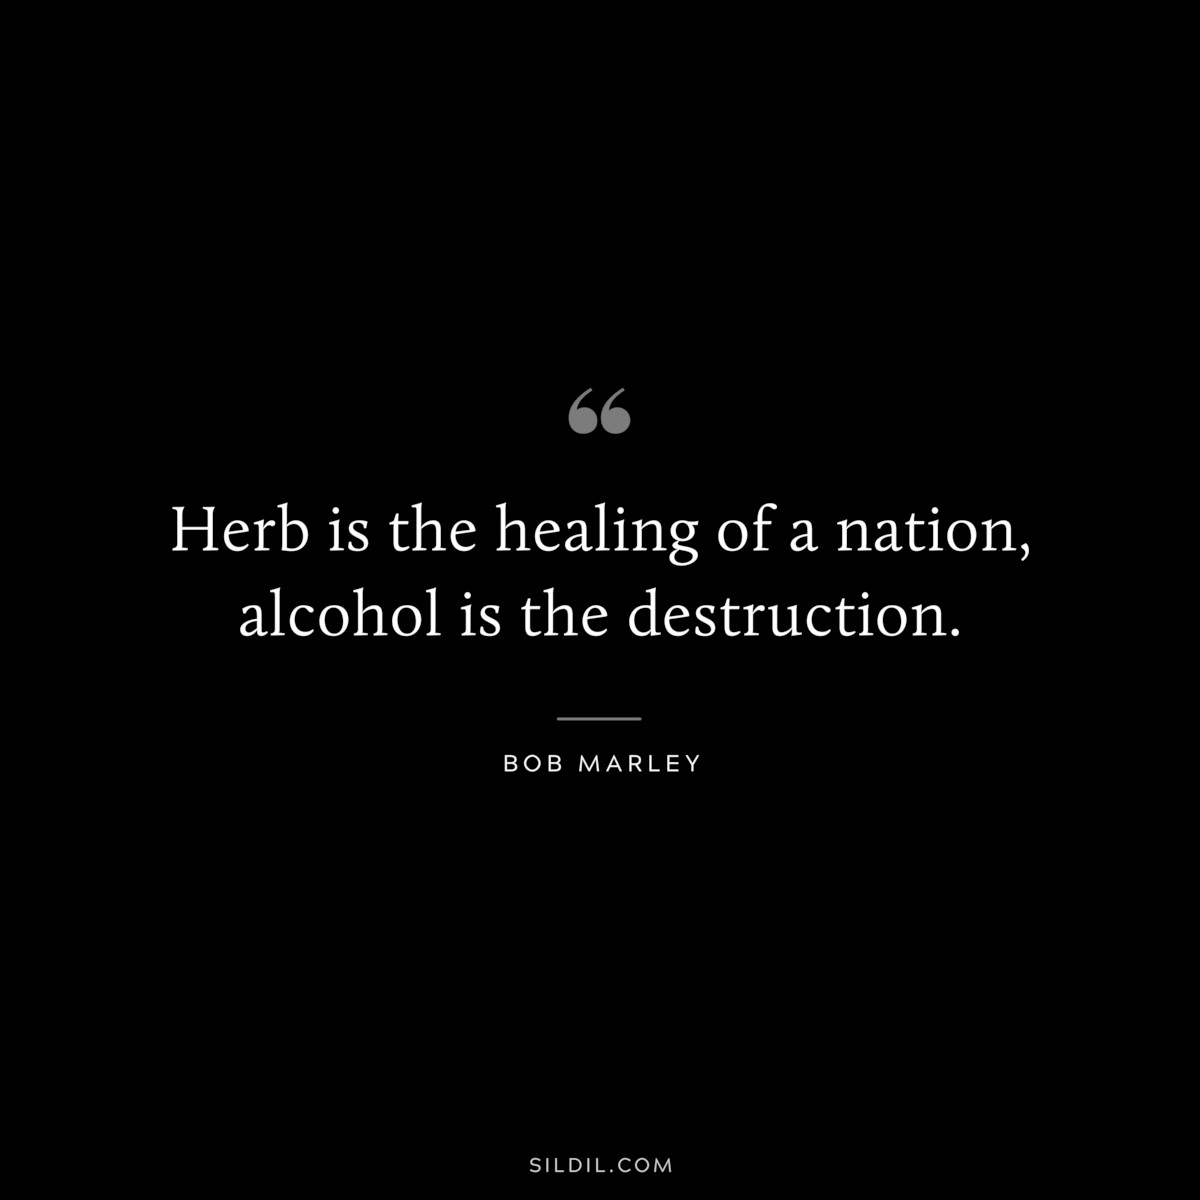 Herb is the healing of a nation, alcohol is the destruction. ― Bob Marley